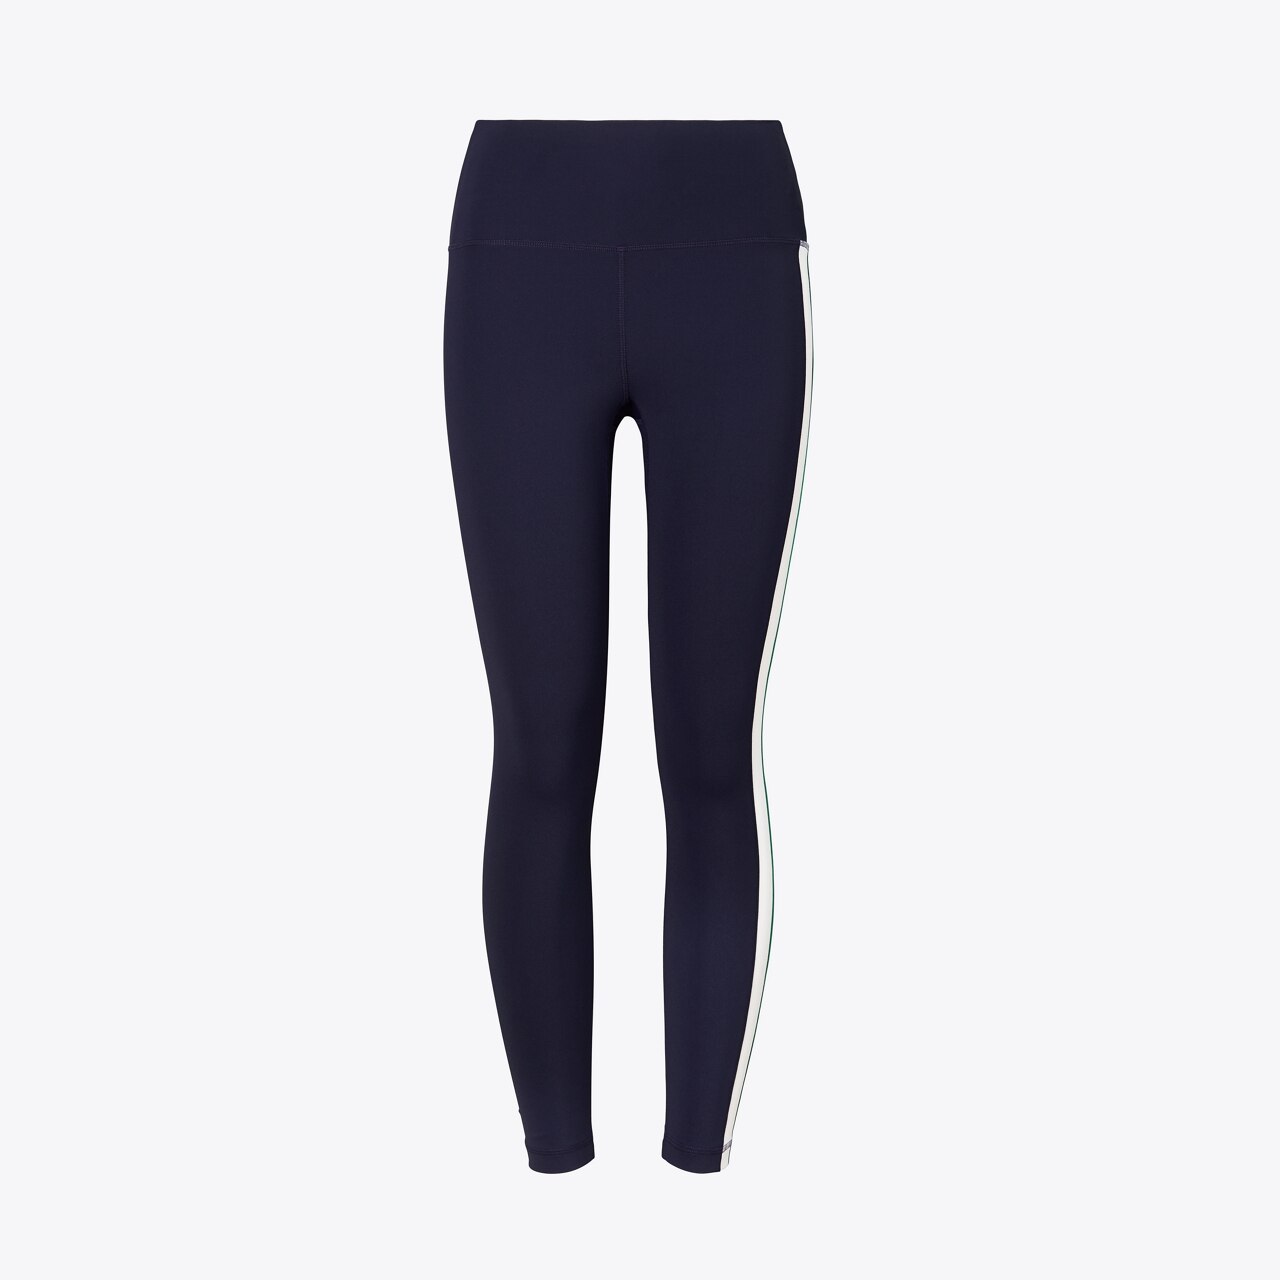 TALA REVE PIPED Side Striped Force Leggings Women's Size Large New With Tag  £37.90 - PicClick UK